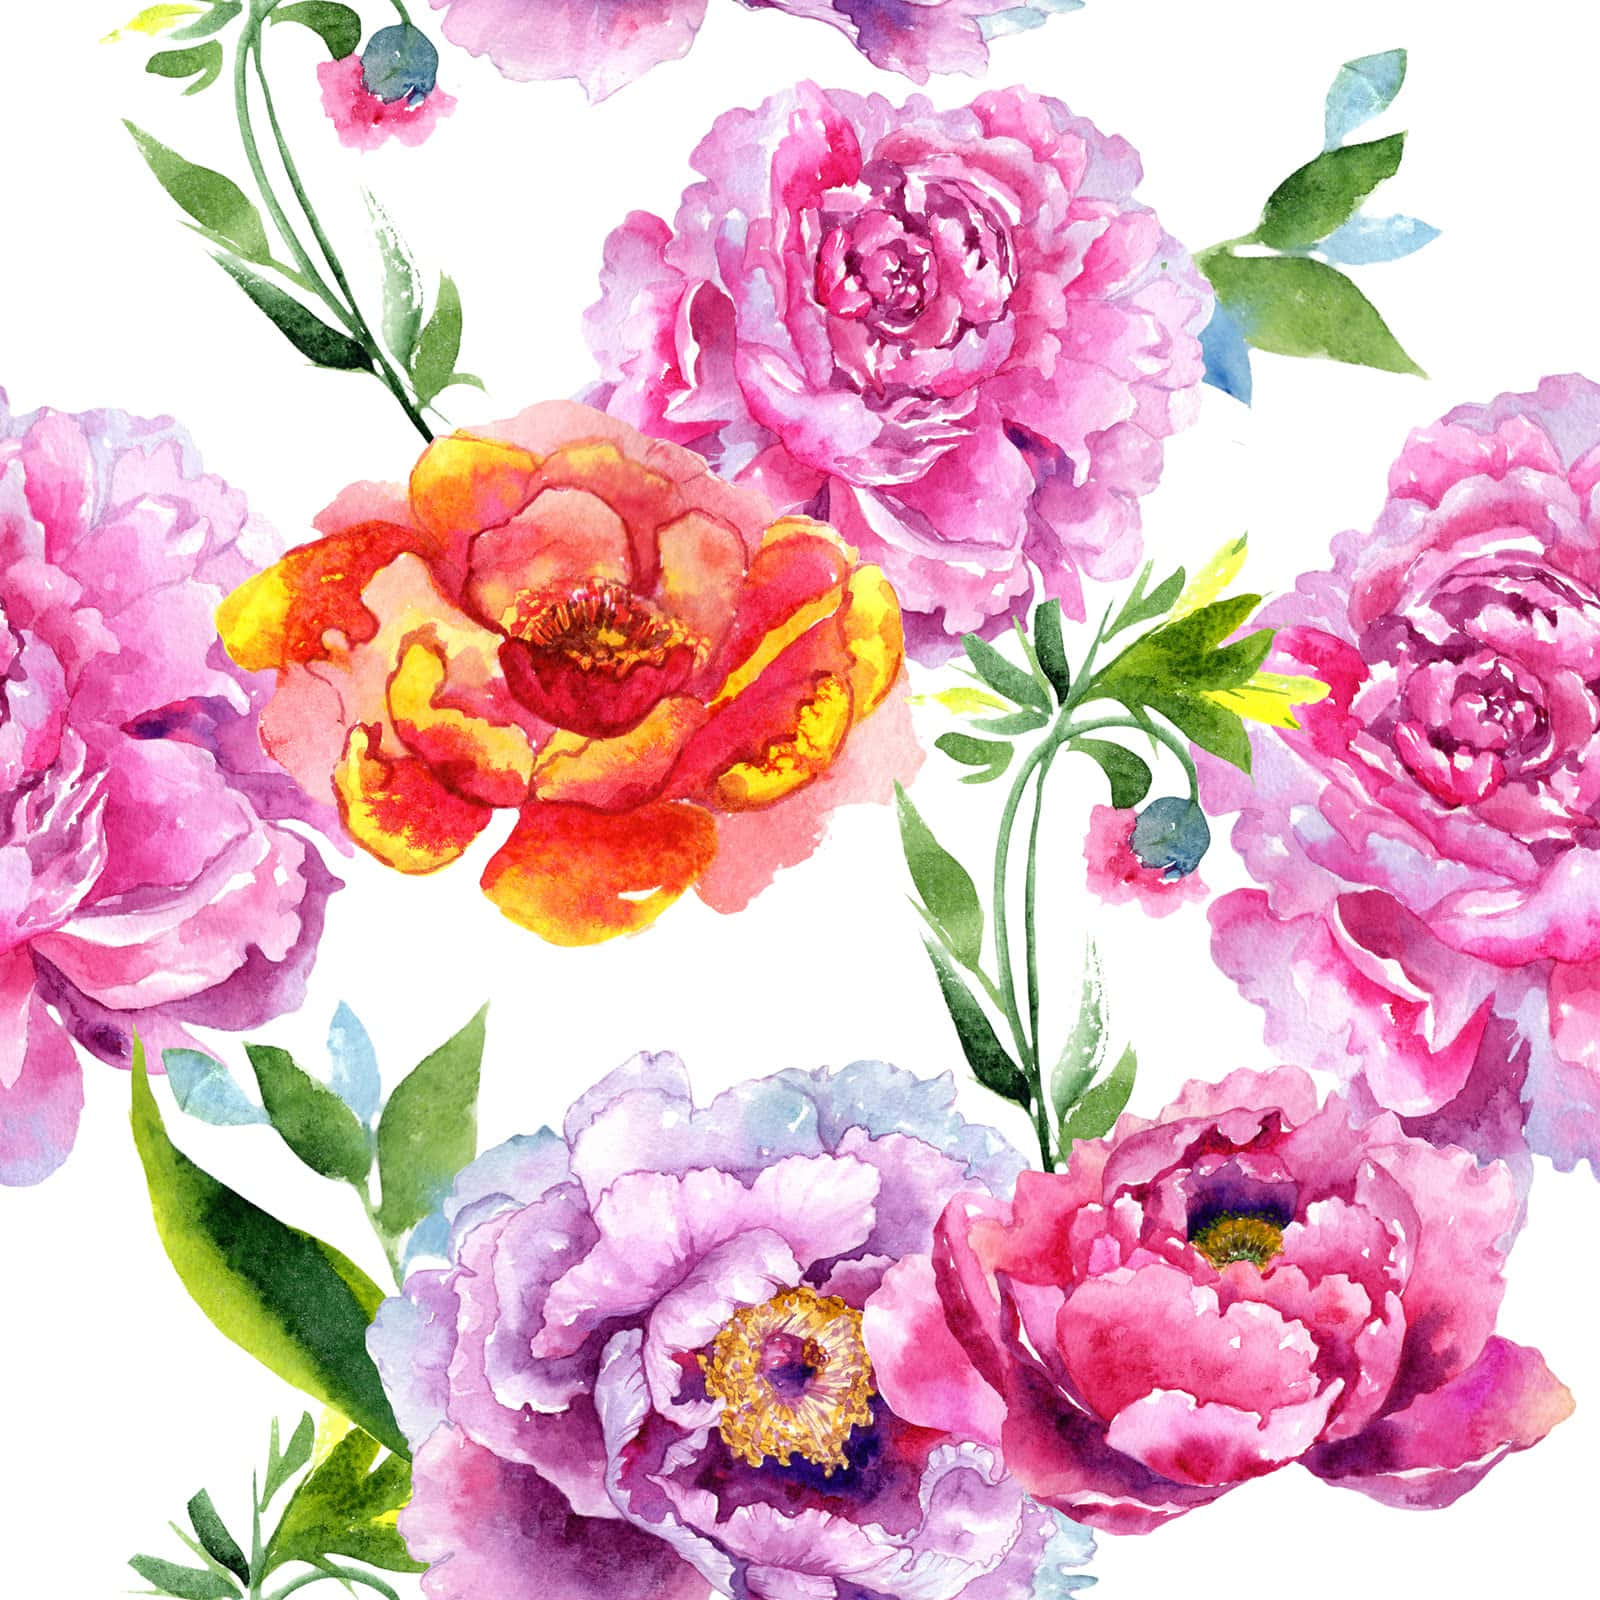 Watercolor Floral Patterns With Carnation Wallpaper